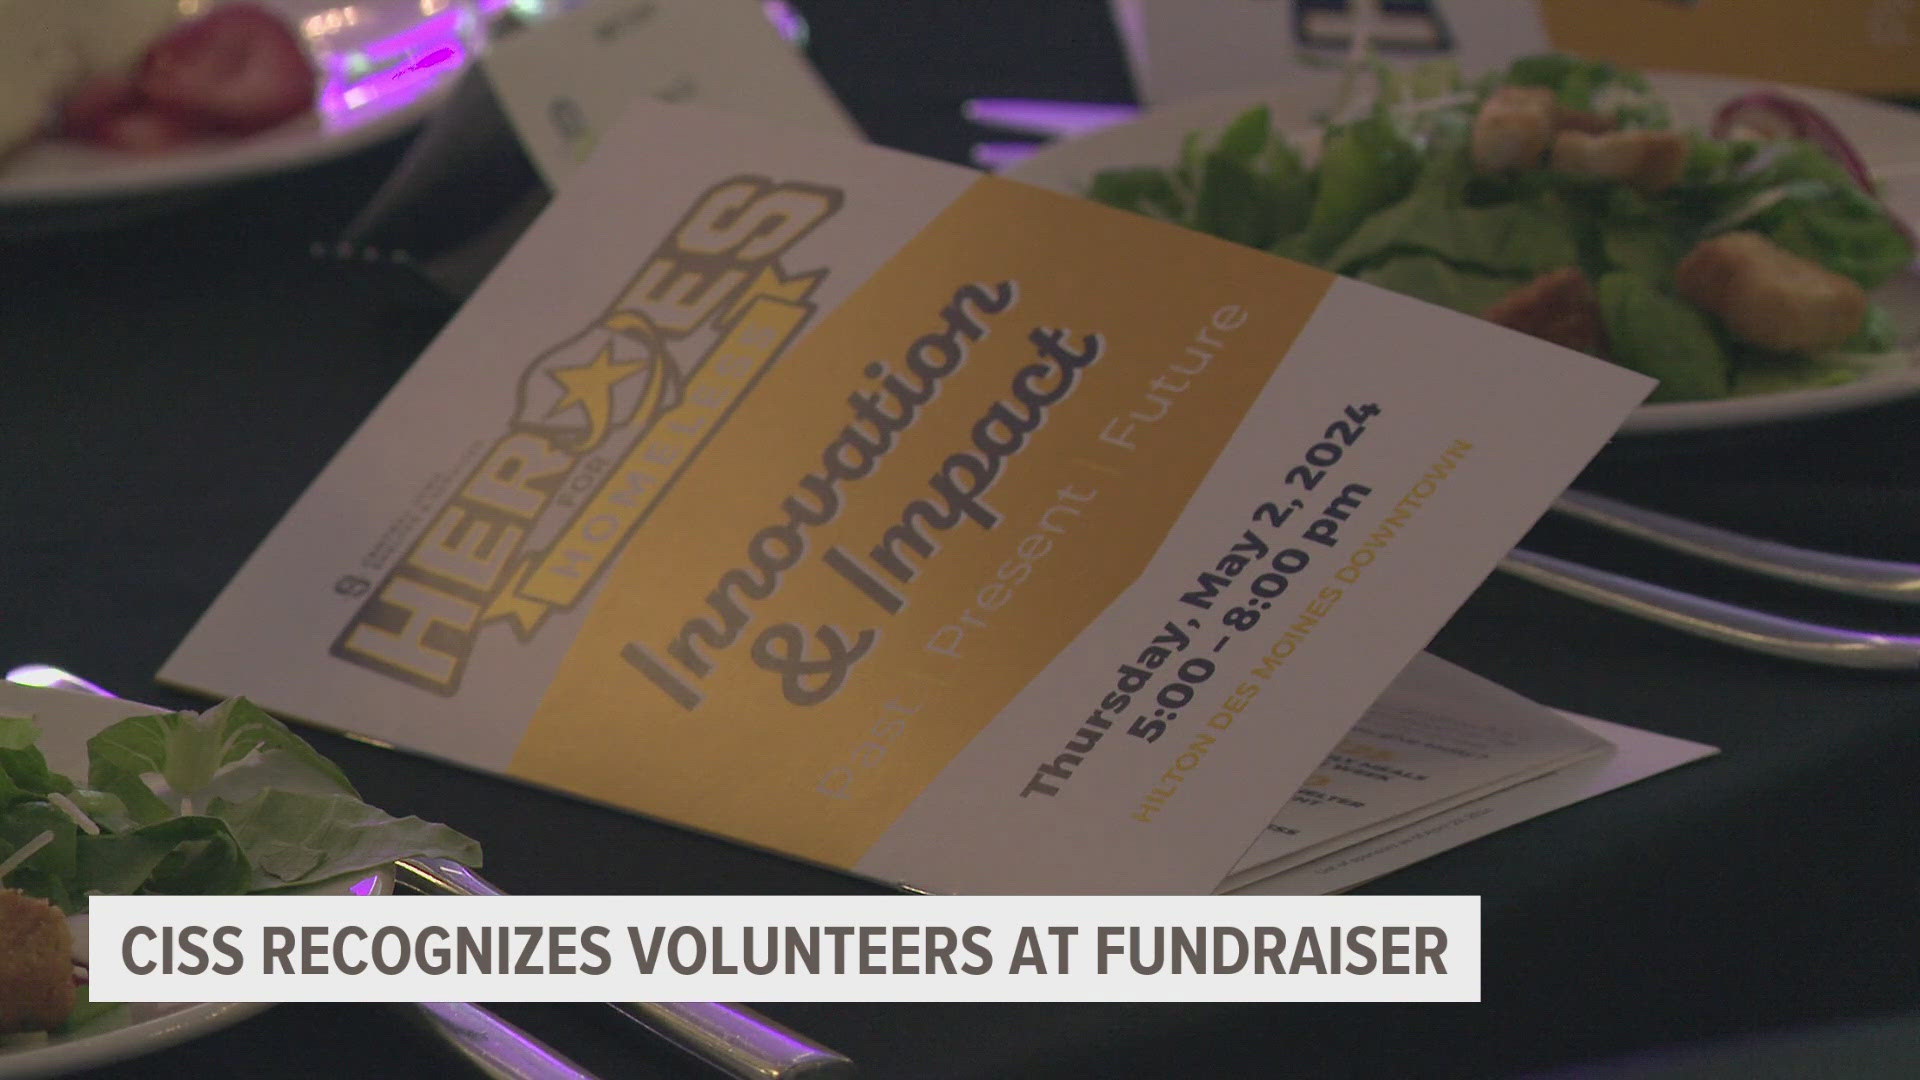 The event raised money to support the shelter's ongoing needs.